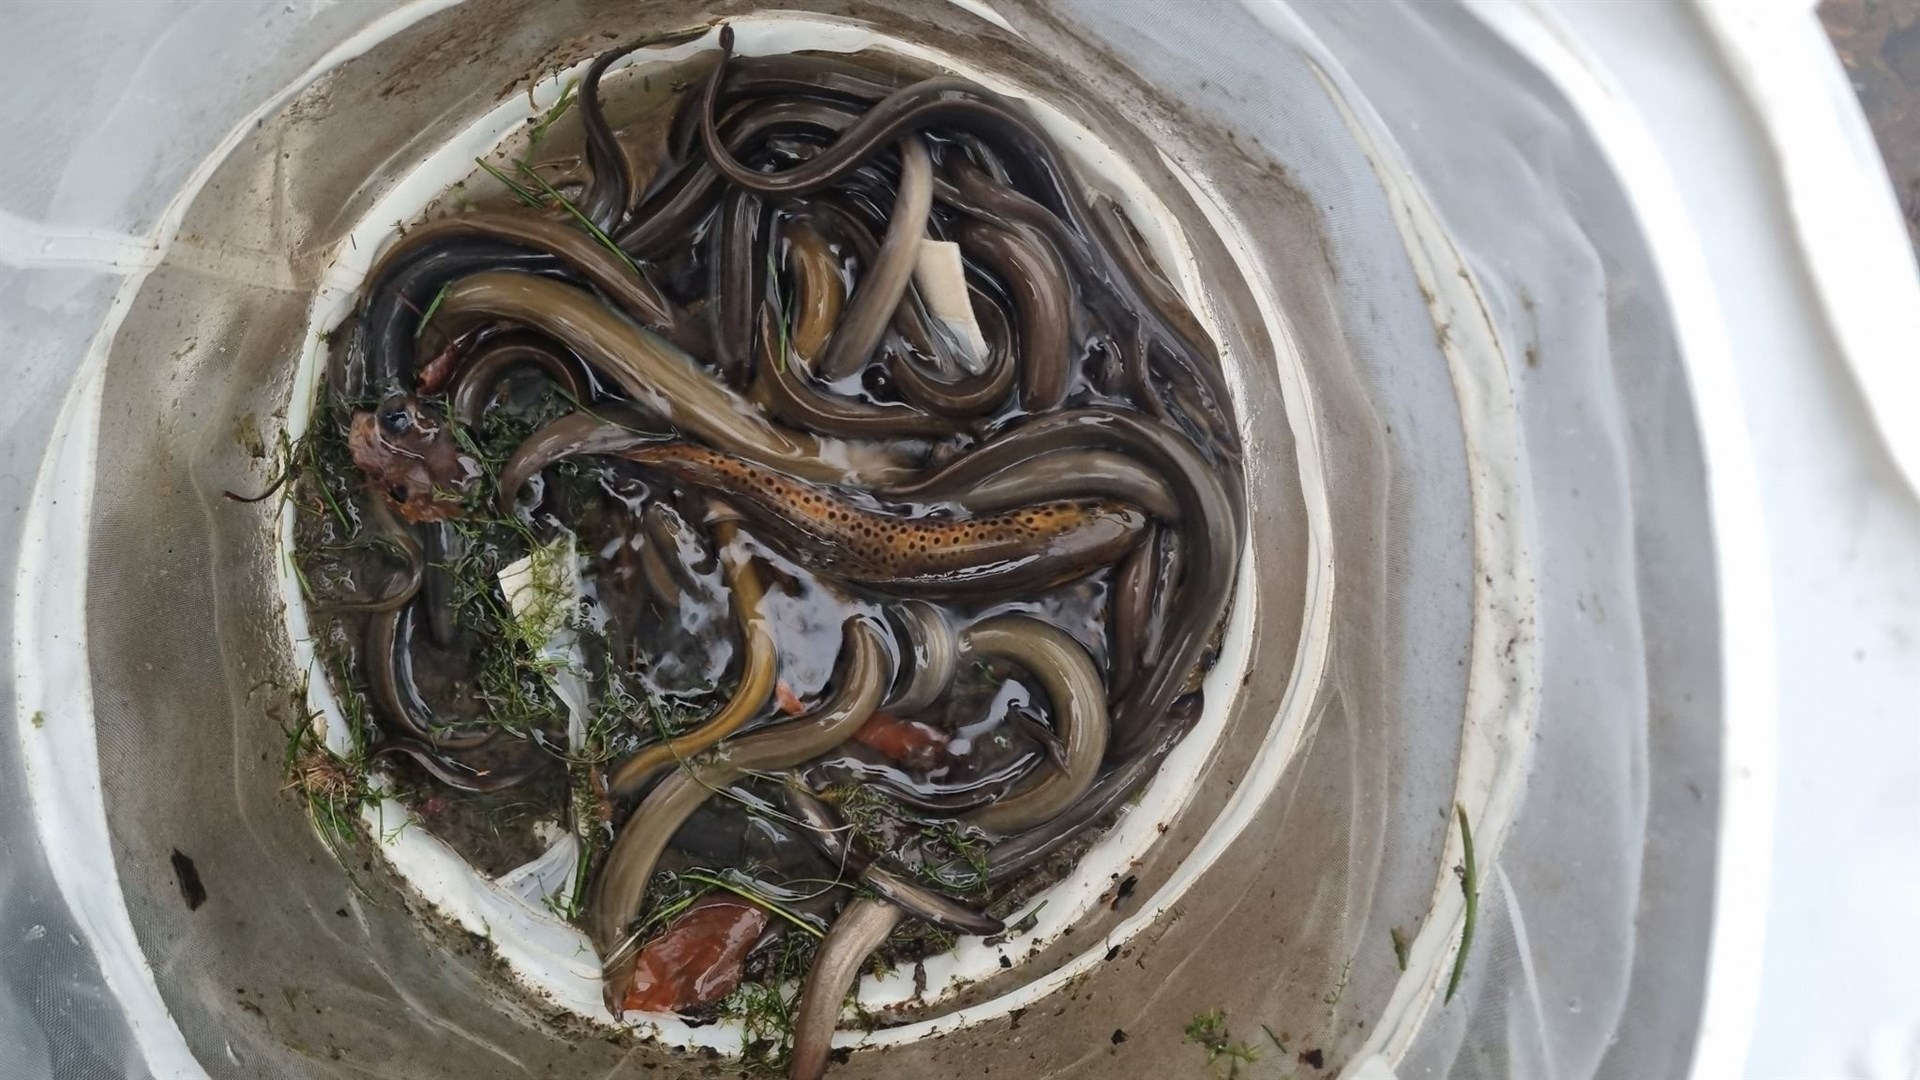 The catch from the first session, 46 eels, one brown trout, minnows, sticklebacks and a few lamprey.